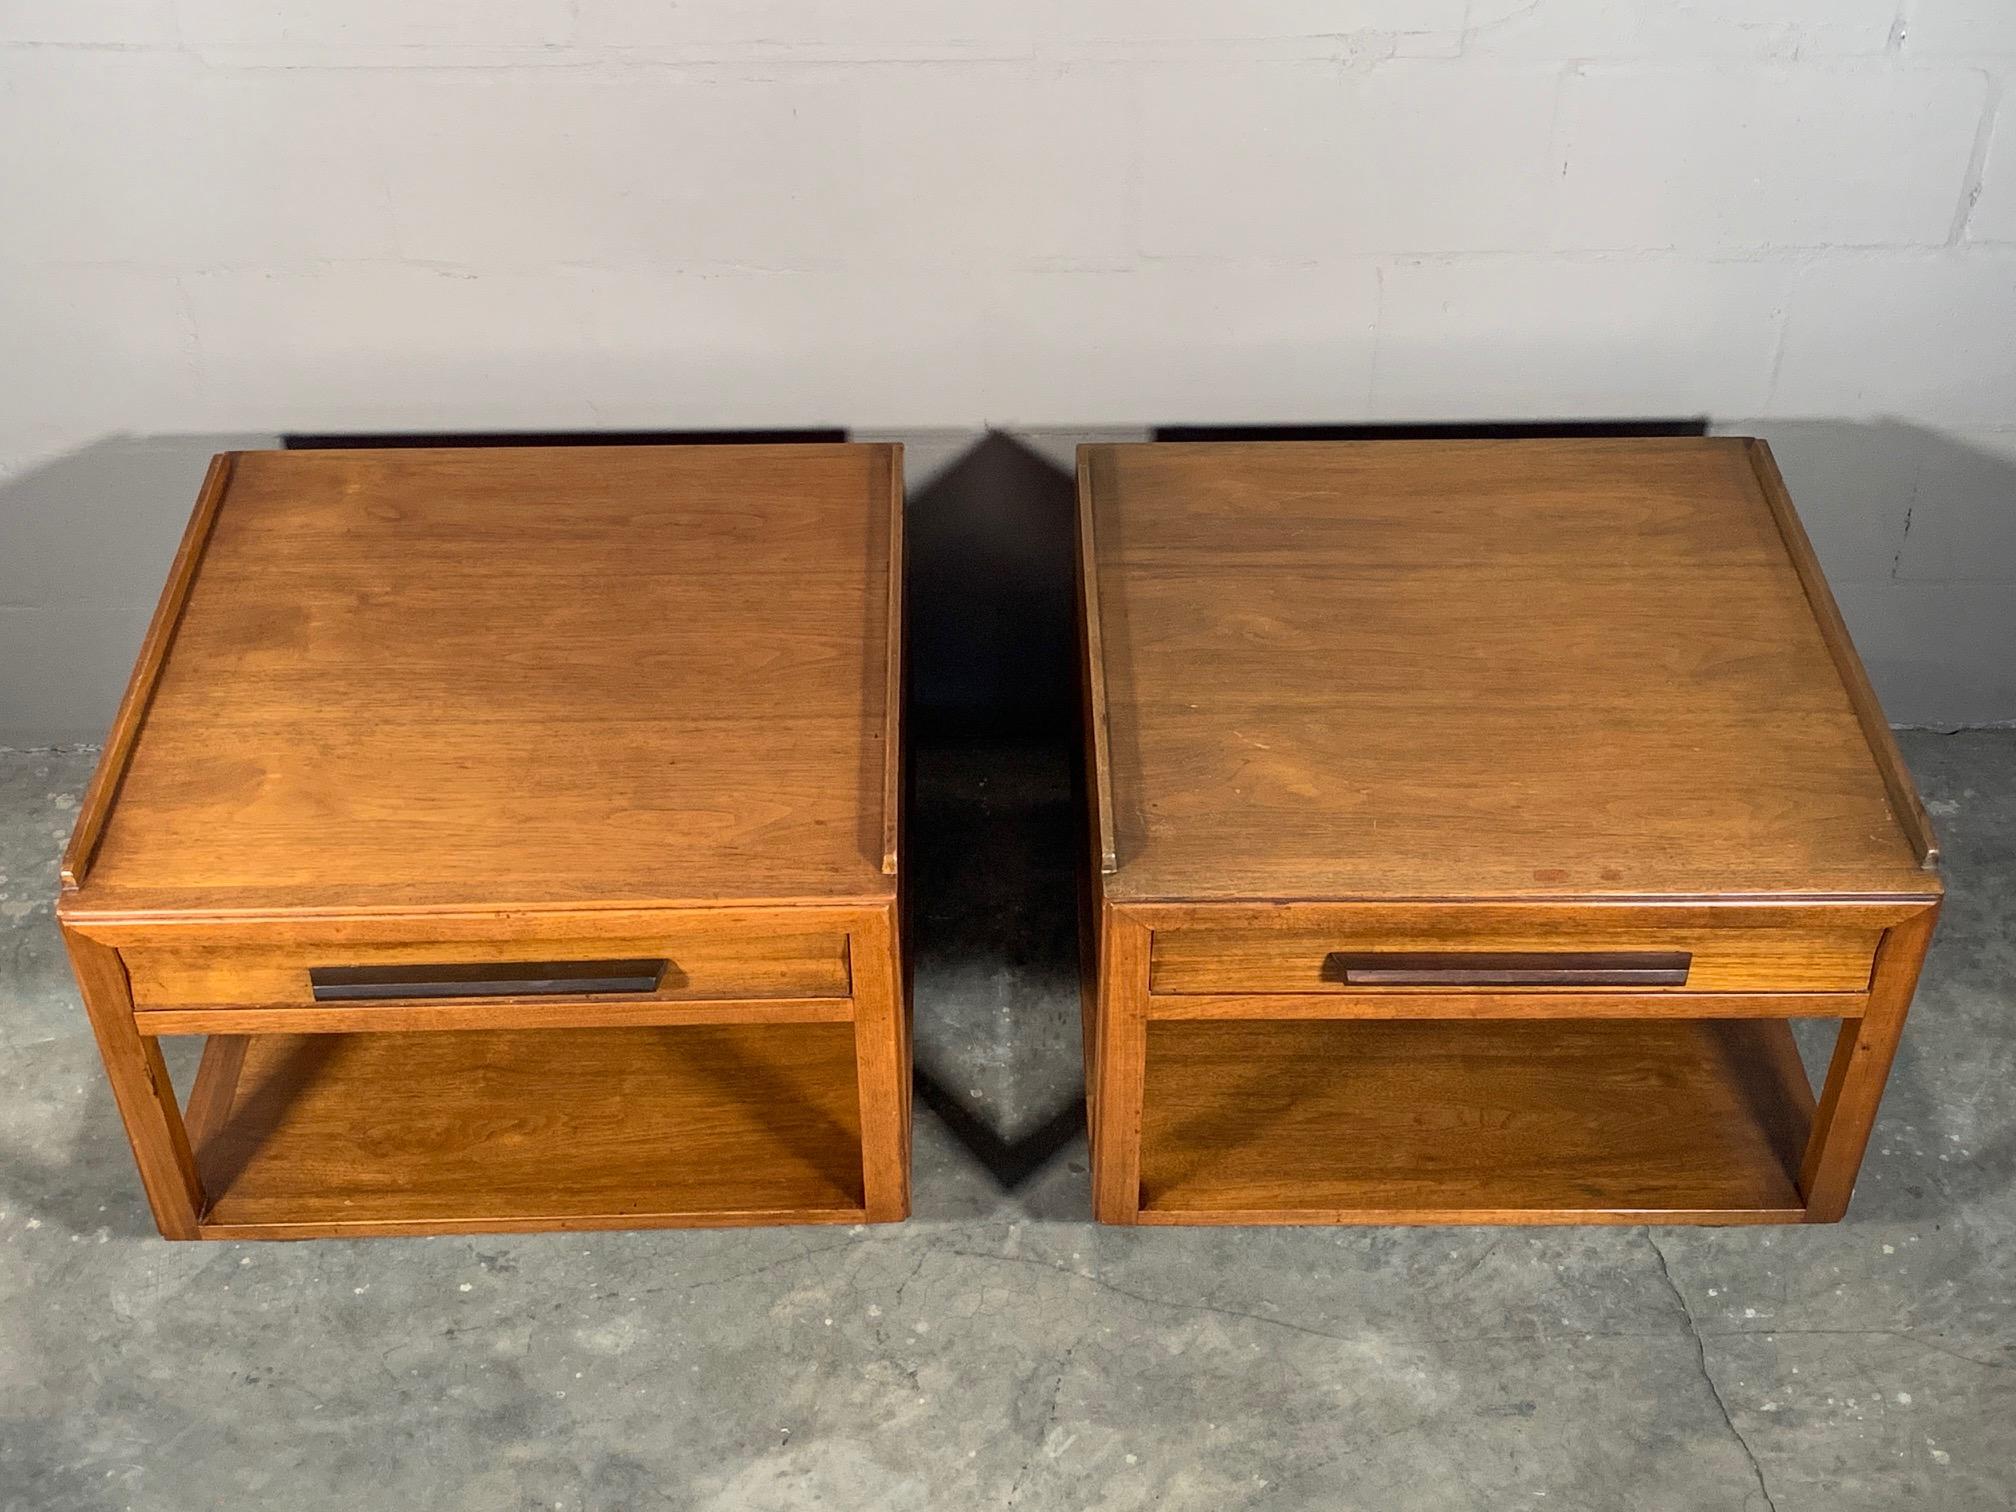 A pair of unusual, large scale #5913B tables, by Edward Wormley for Dunbar. Walnut with rosewood handles, drawer and lower shelf, they have removable casters. Each measures 27